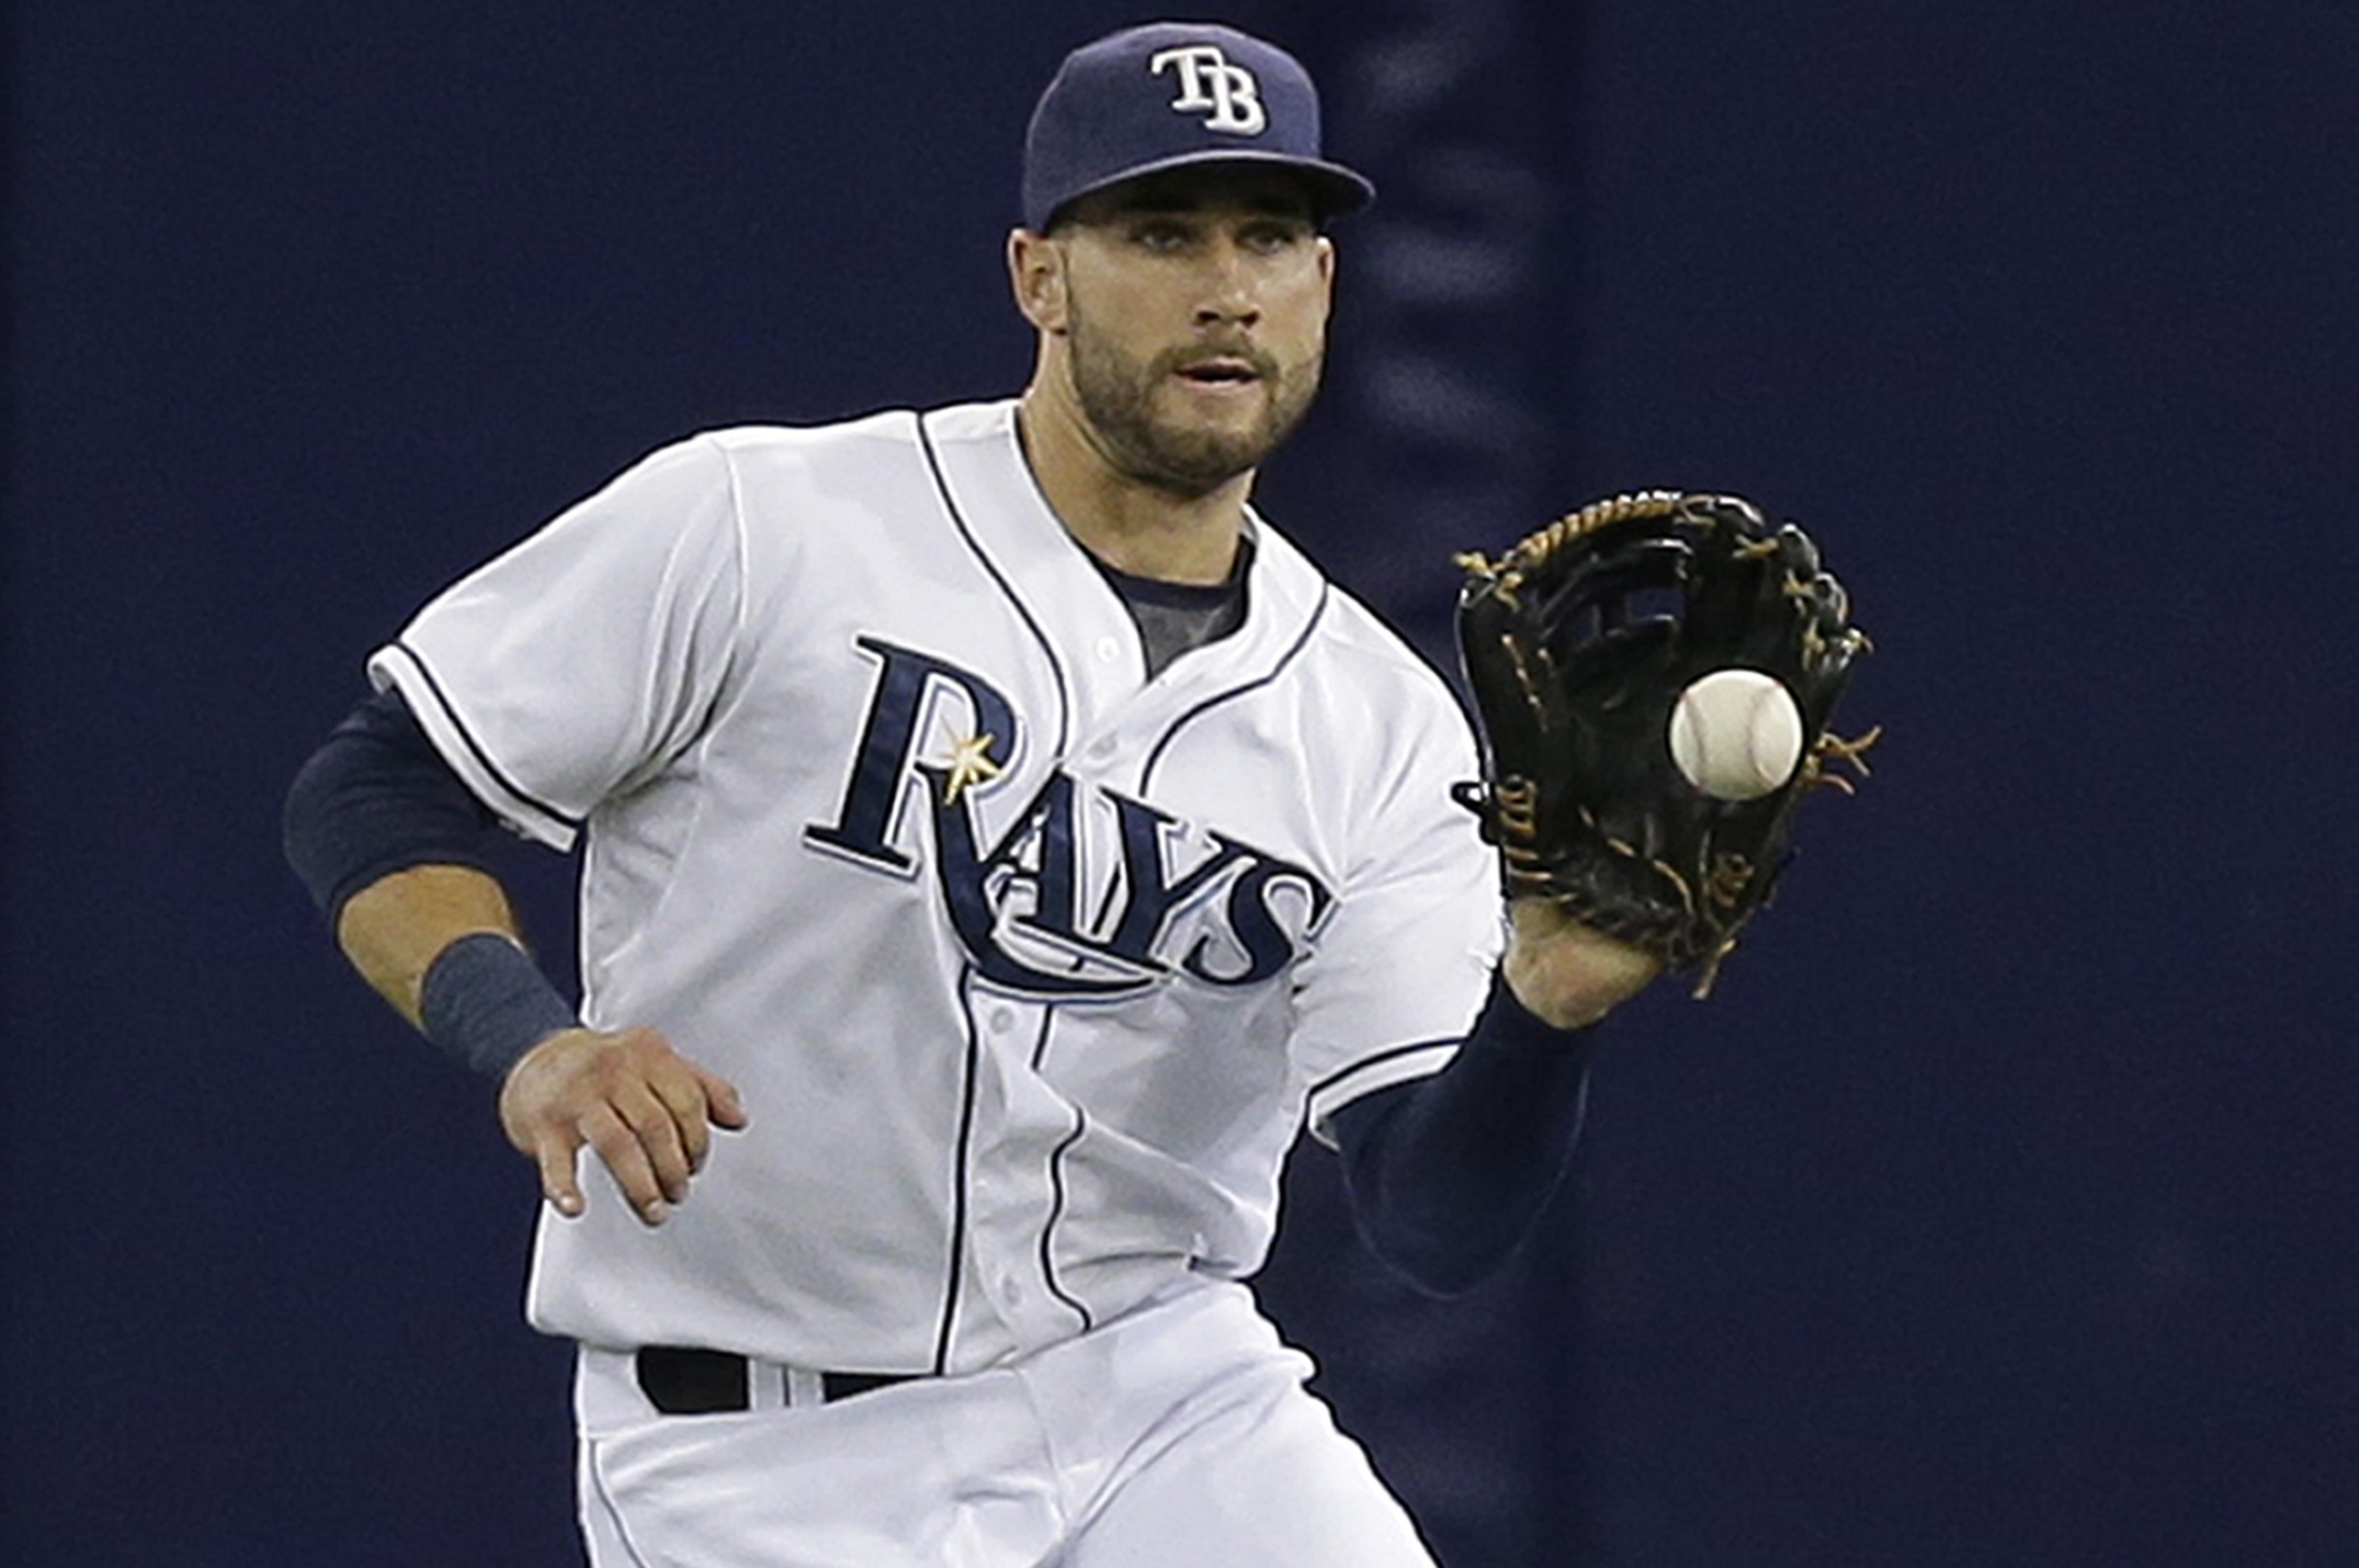 VIDEO: Tampa Bay's Kevin Kiermaier Gets Inside-the-Park Home Run